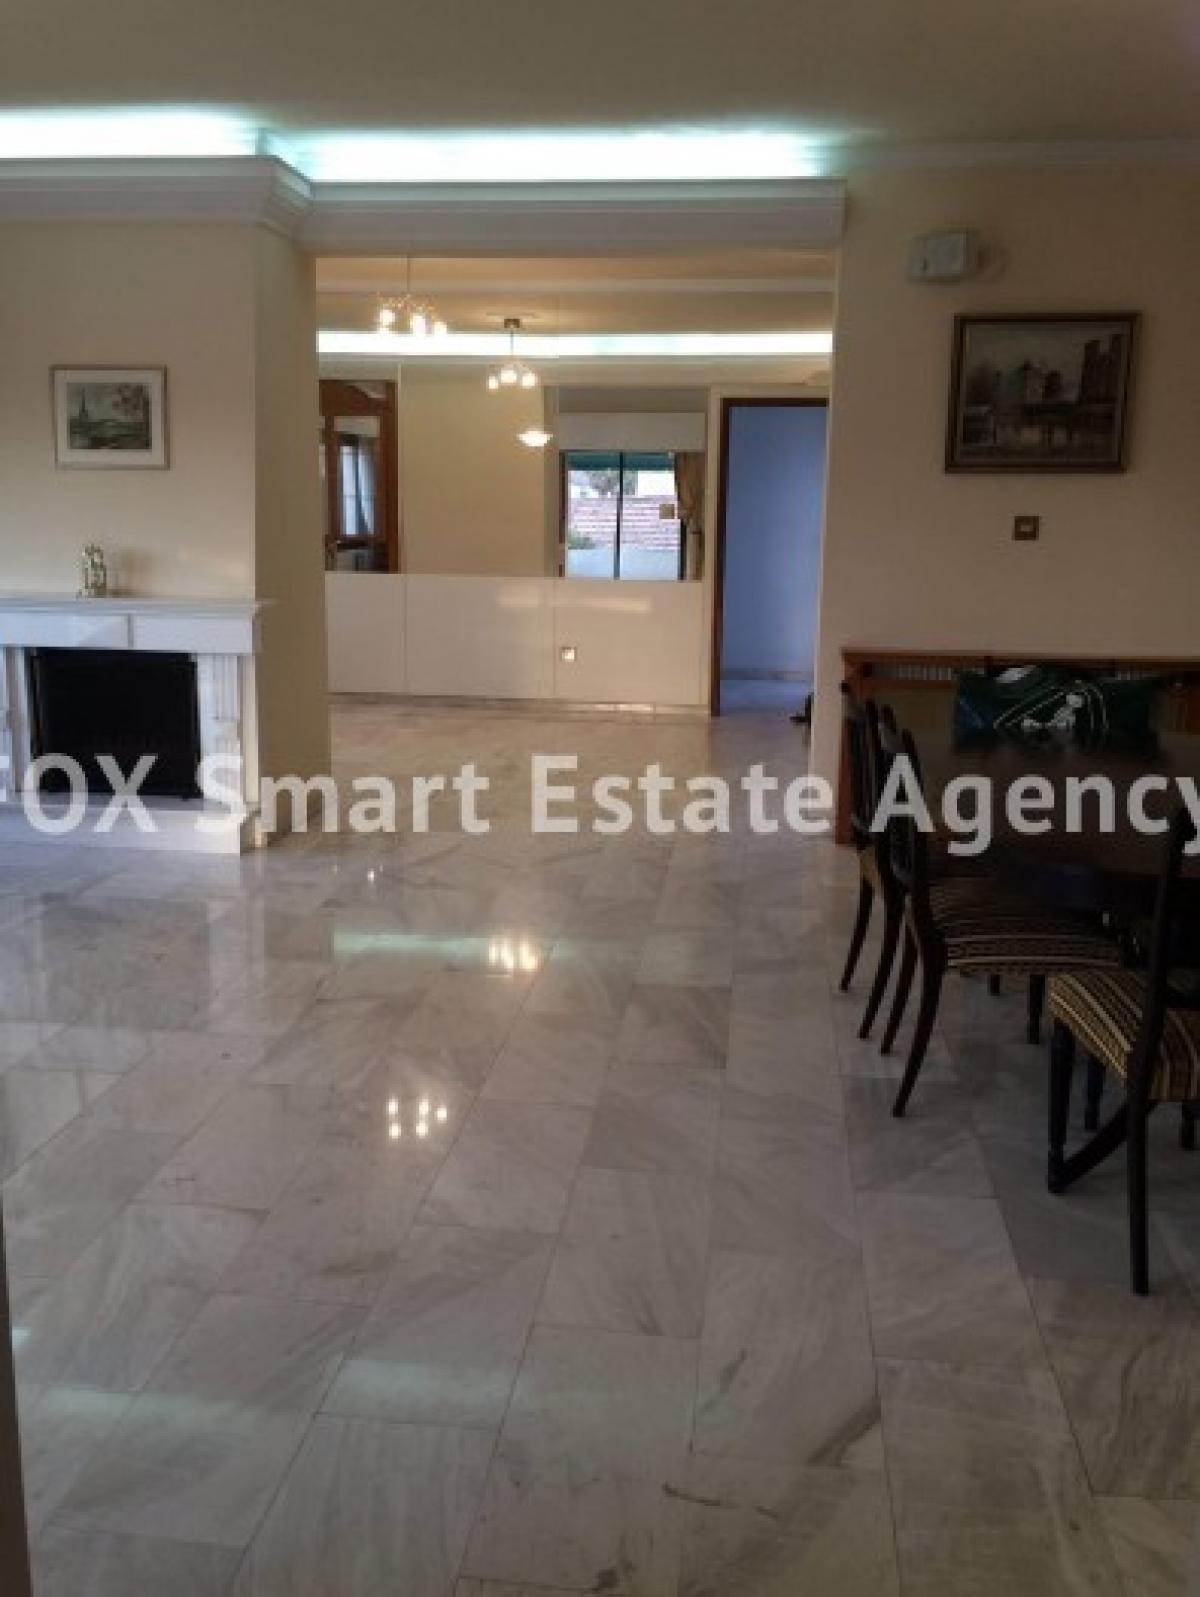 Picture of Apartment For Rent in Katholiki, Limassol, Cyprus